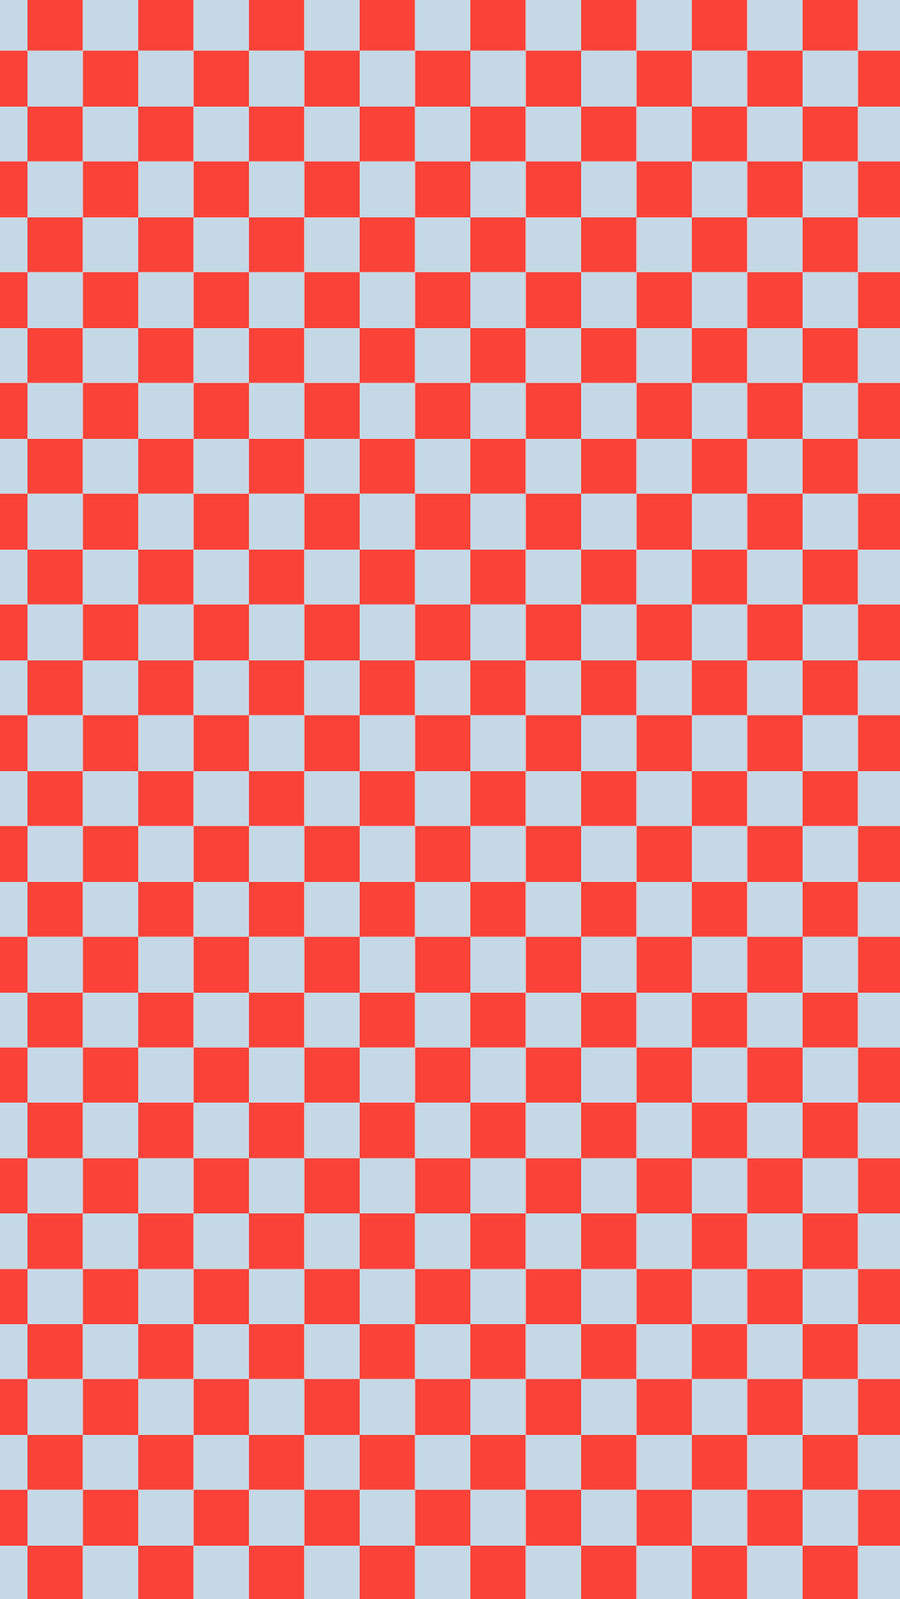 Red and Blue Checkerboard | Digital Phone Wallpaper